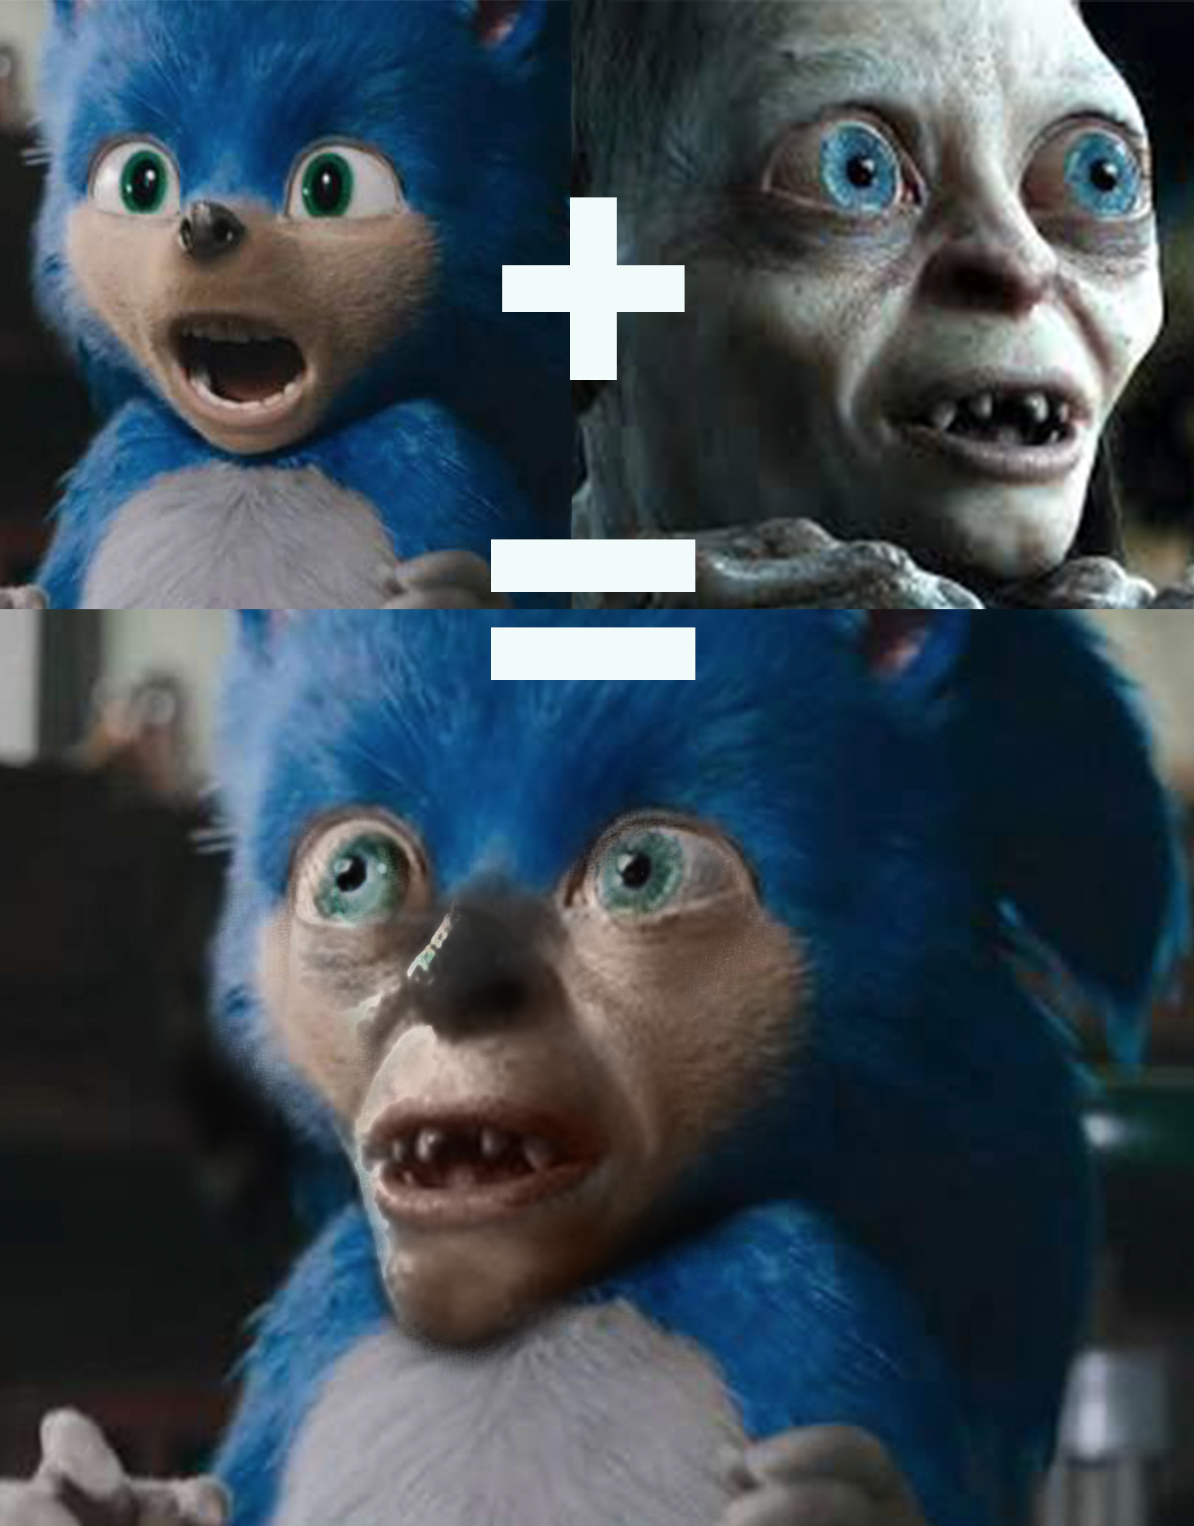 Sonic the hedgehog plus smeagol from Lord of the Rings and then a mixture of the two faces